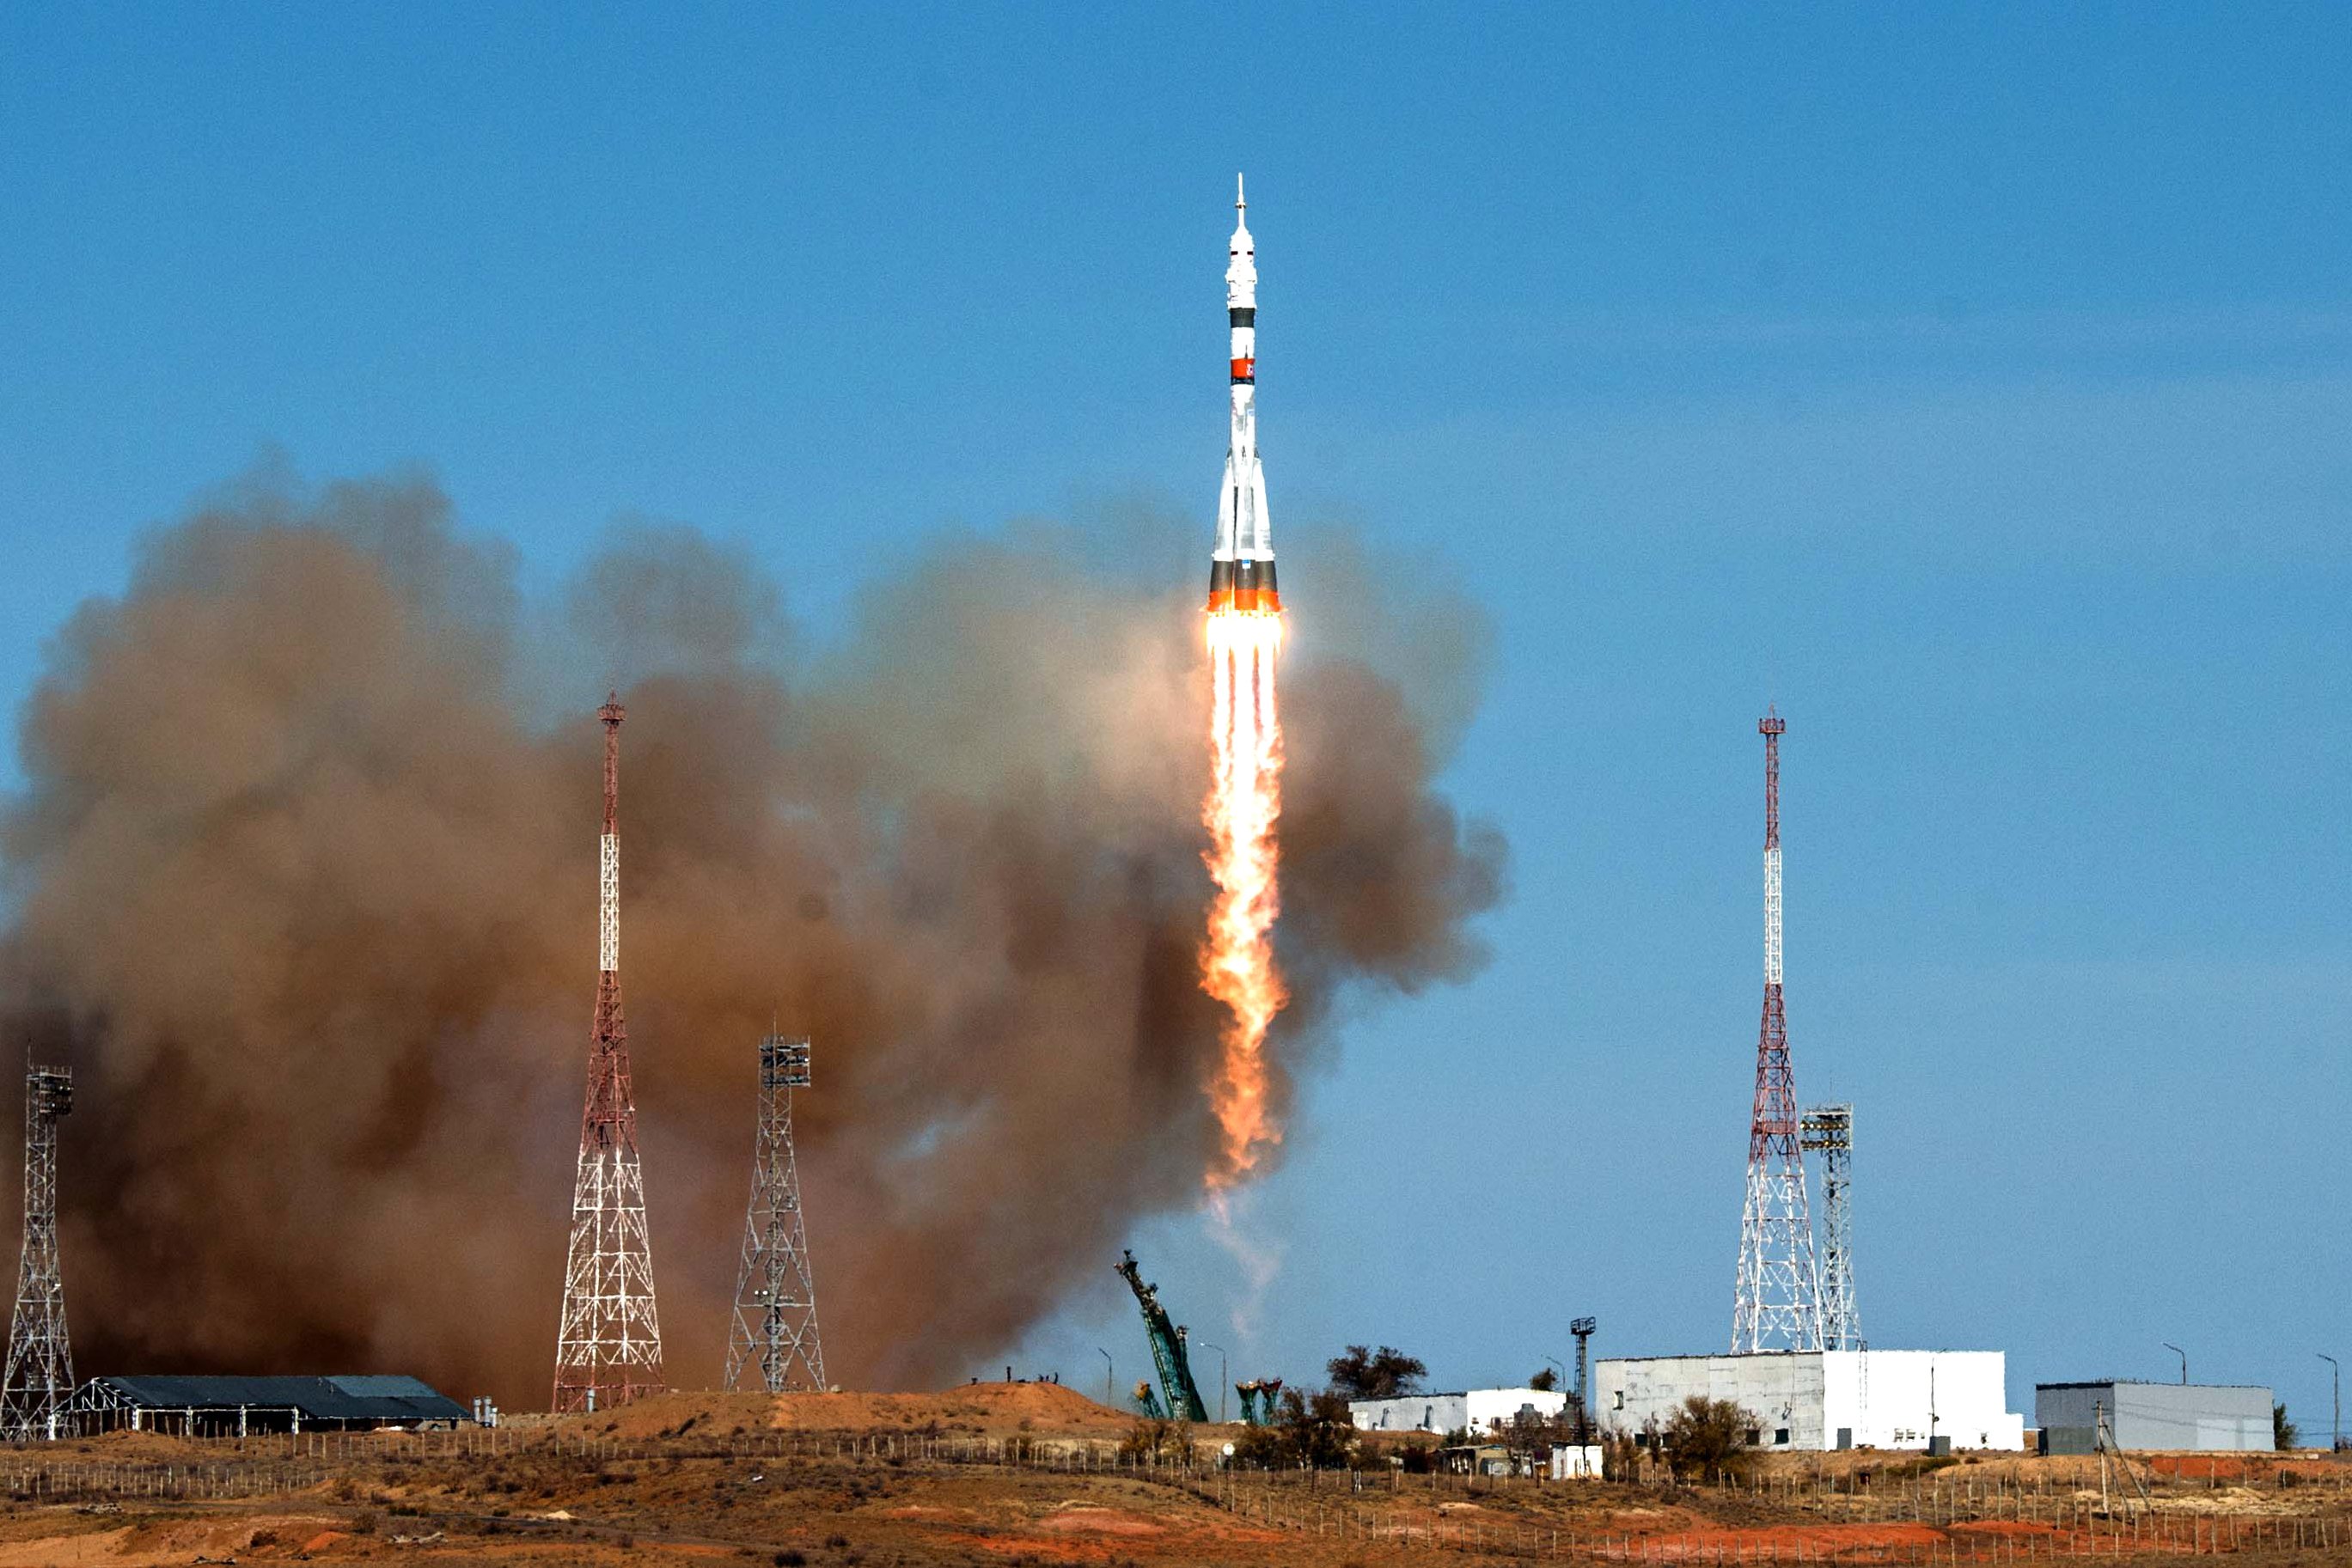 Soyuz-2.1a rocket booster with Soyuz MS-17 spacecraft launched to ISS from Baikonur Cosmodrome